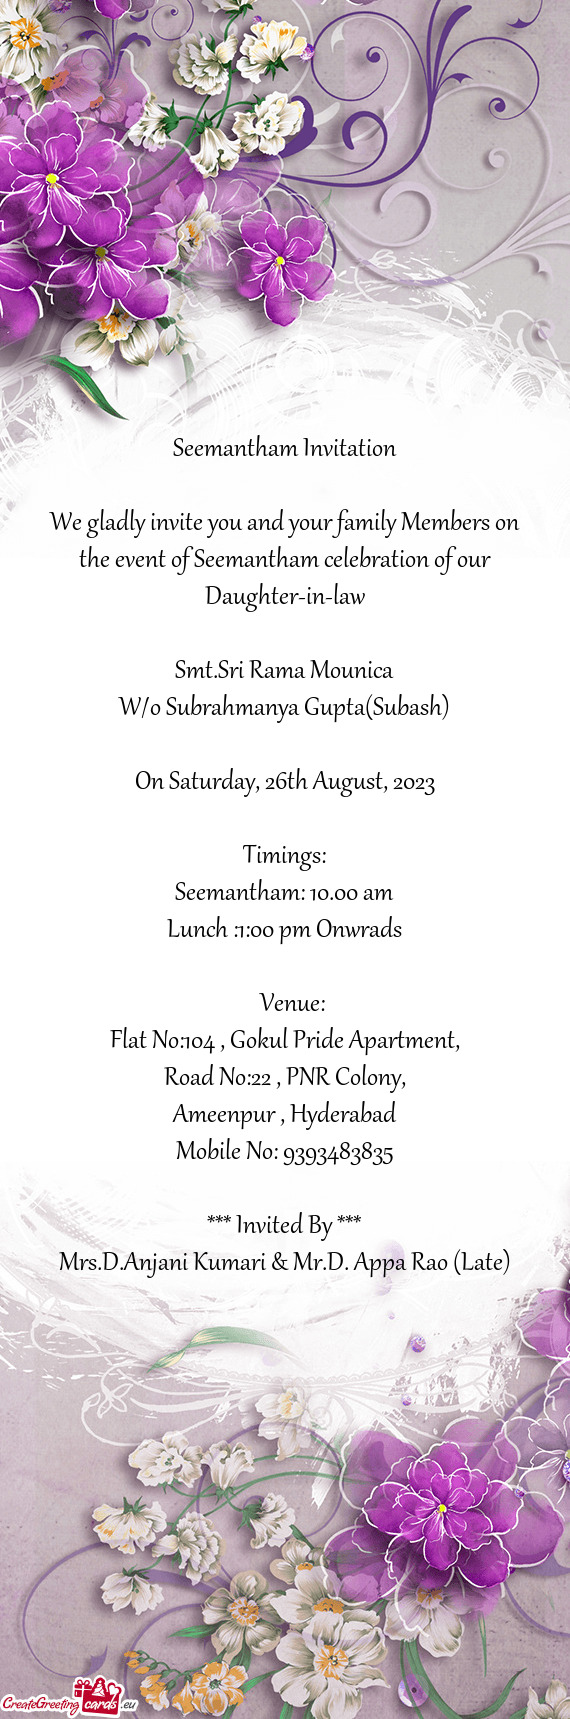 We gladly invite you and your family Members on the event of Seemantham celebration of our Daughter